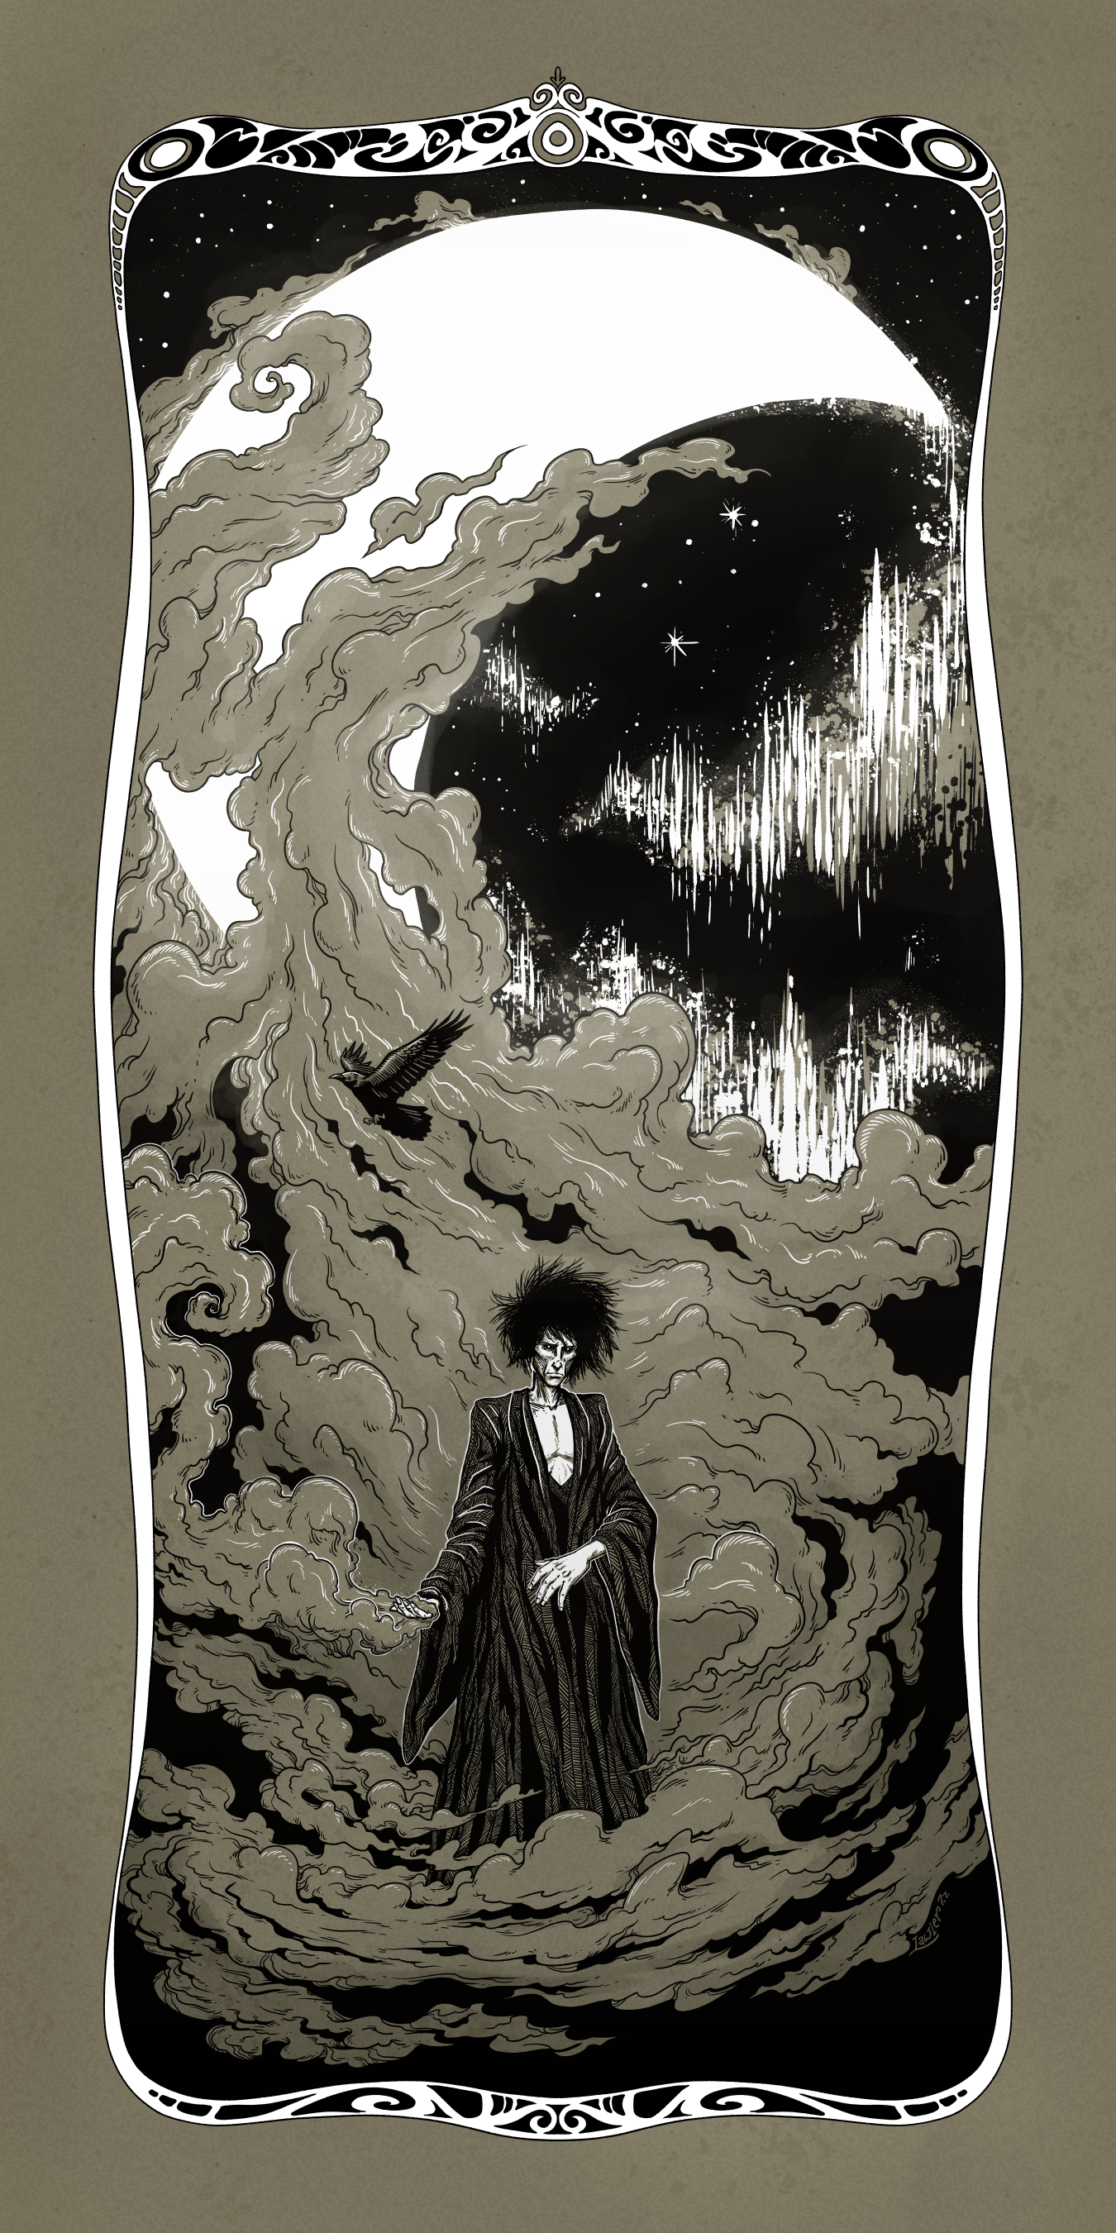 Artwork of Morpheus, the Sandman, also known as Dream of the Endless, stands in a swirl of sand revealing a nighttime dreamworld. The fanart illustration is wrapped in an intricate border with Dream's symbols of power. Inspired by Neil Gaiman's The Sandman series, fan artwork illustrated by C.Lor.